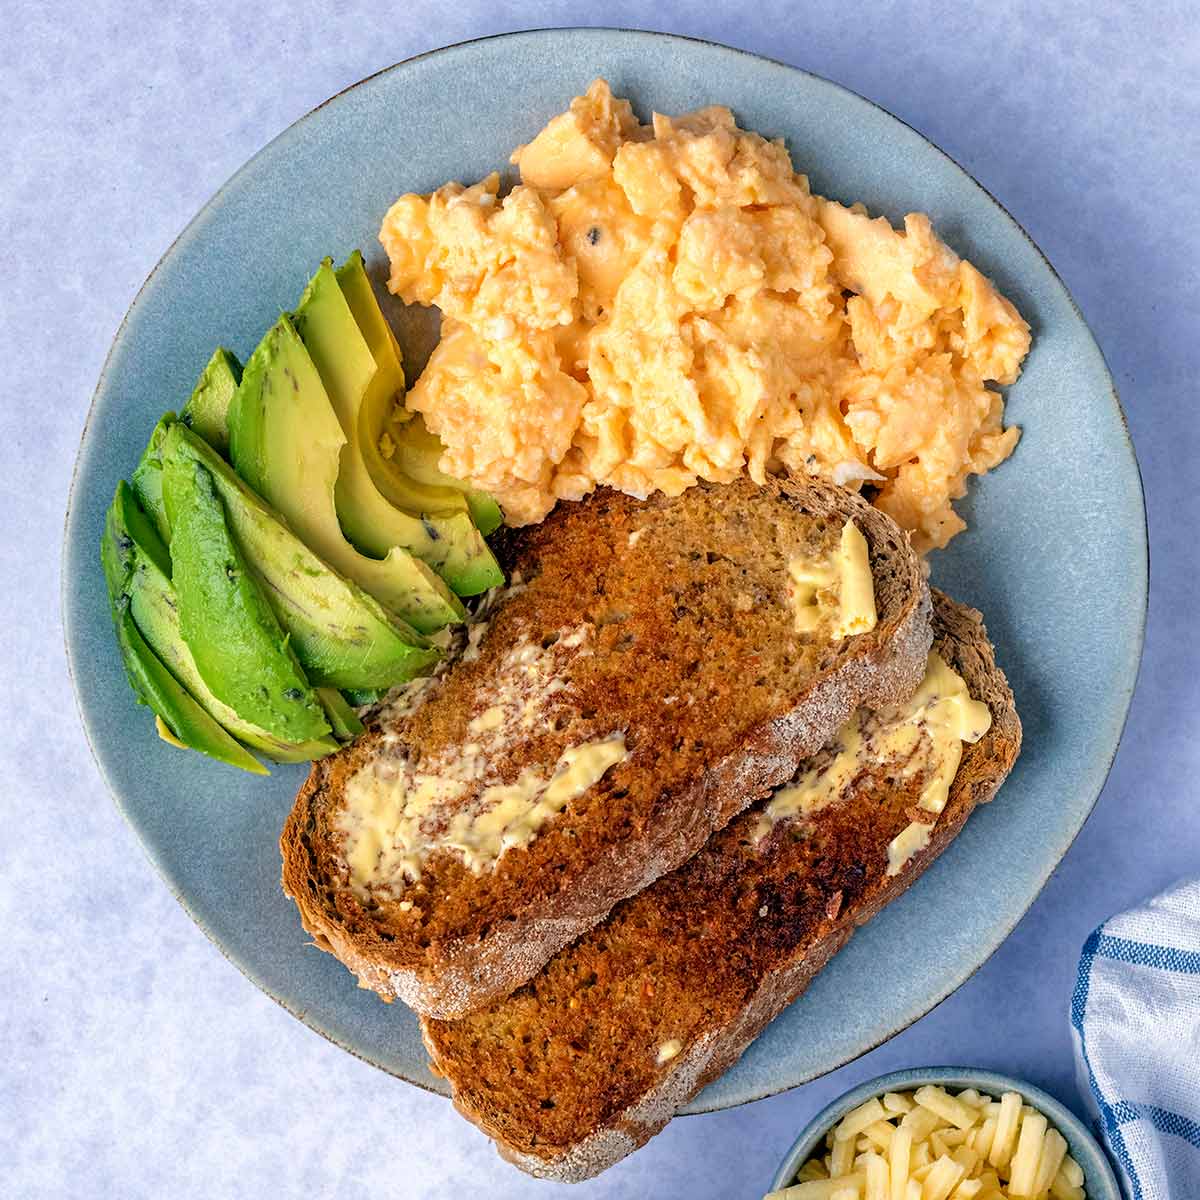 https://hungryhealthyhappy.com/wp-content/uploads/2022/01/Microwave-Scrambled-Eggs-featured.jpg